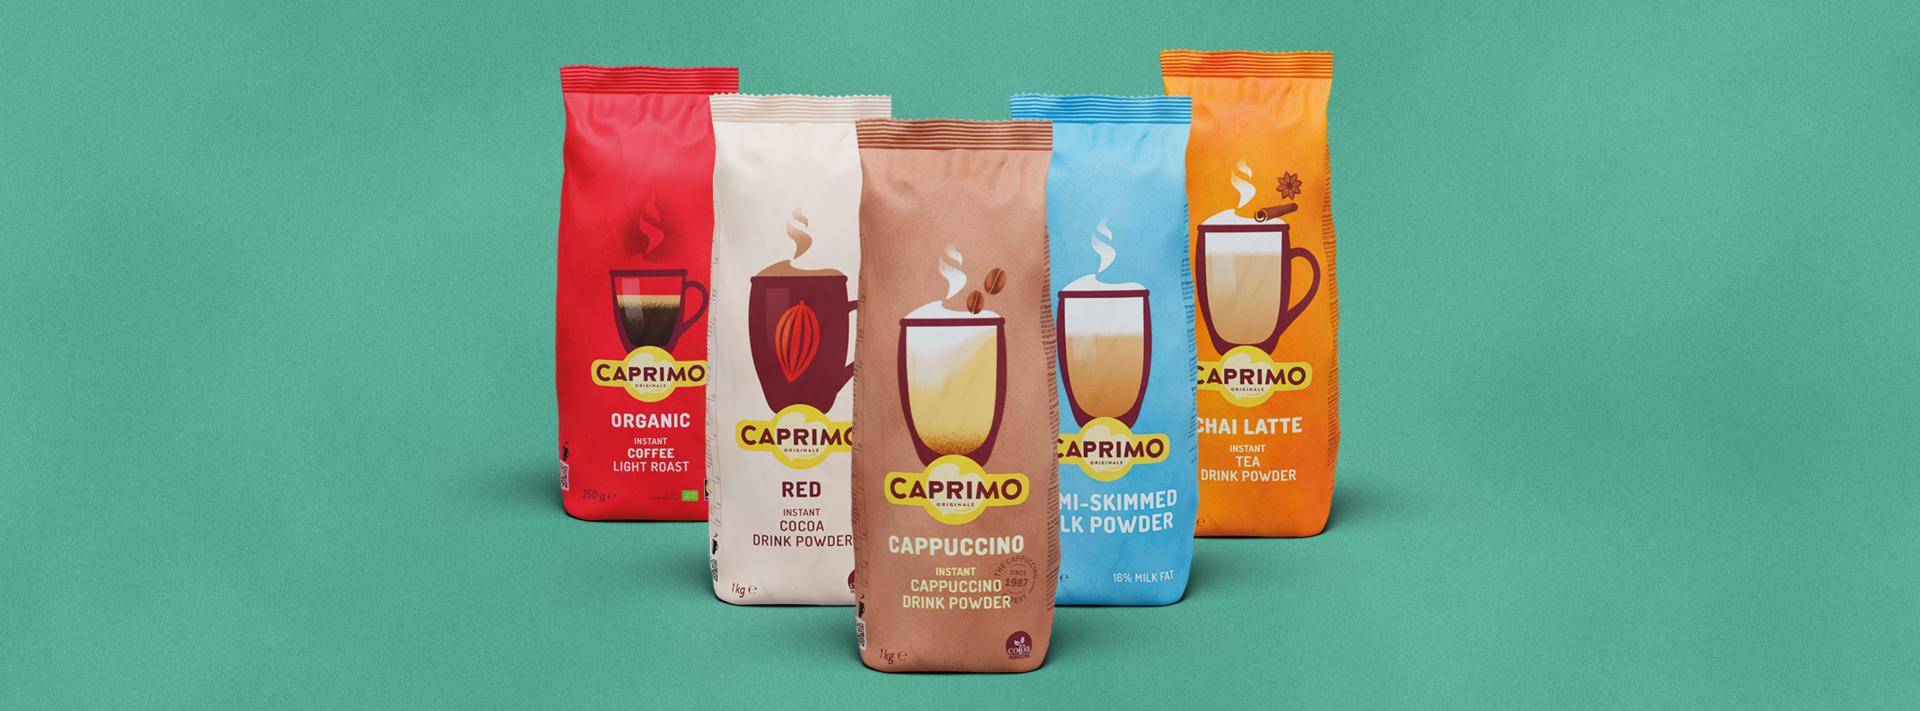 Caprimo_sustainable-packaging